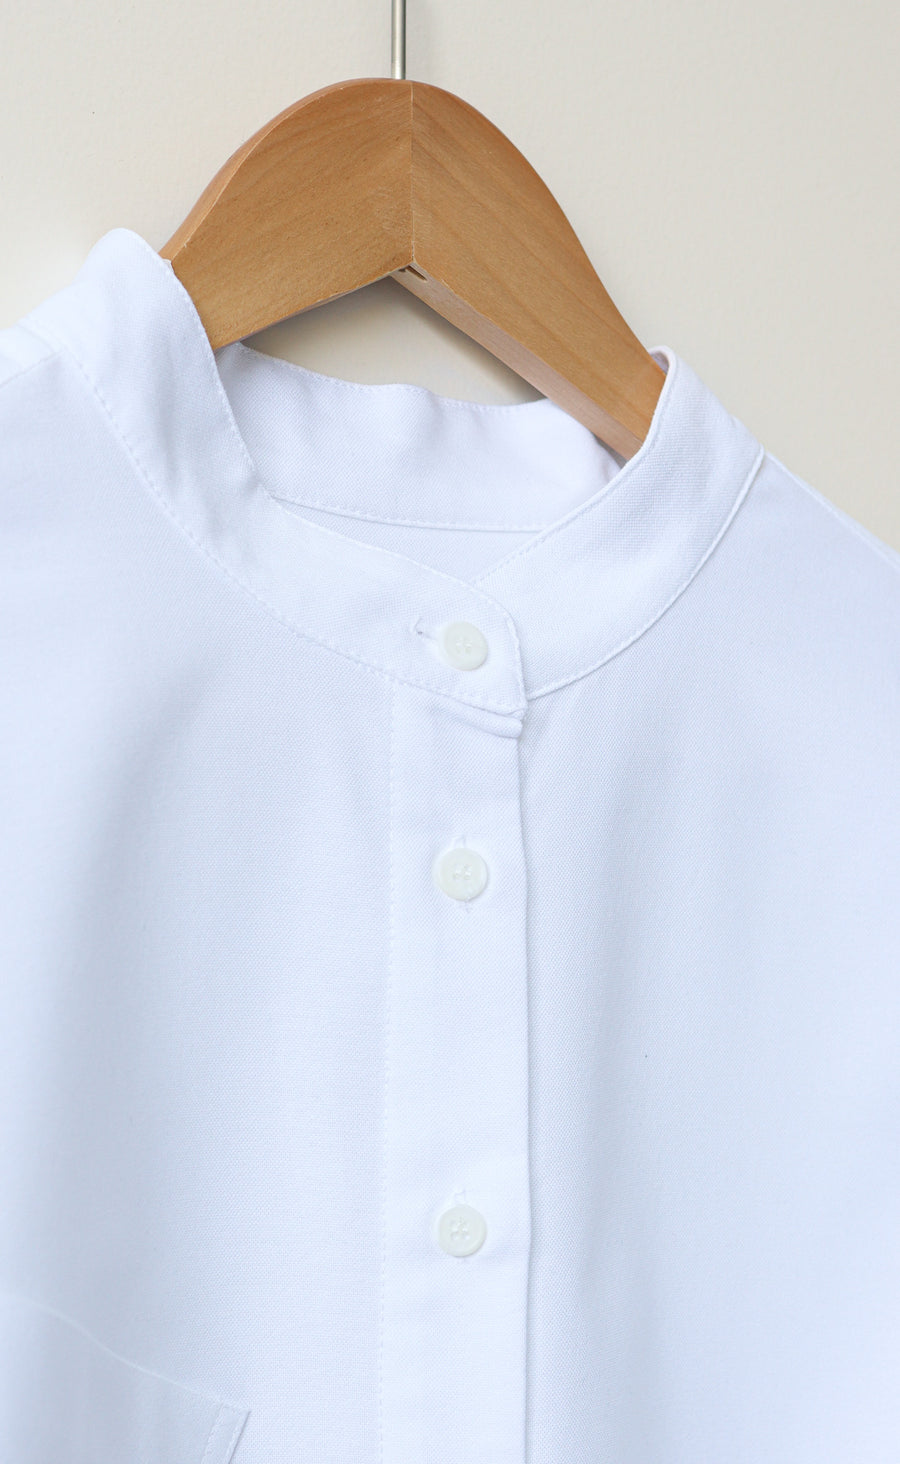 The Tailor - Wayward Fit Tunic - White Cotton Oxford